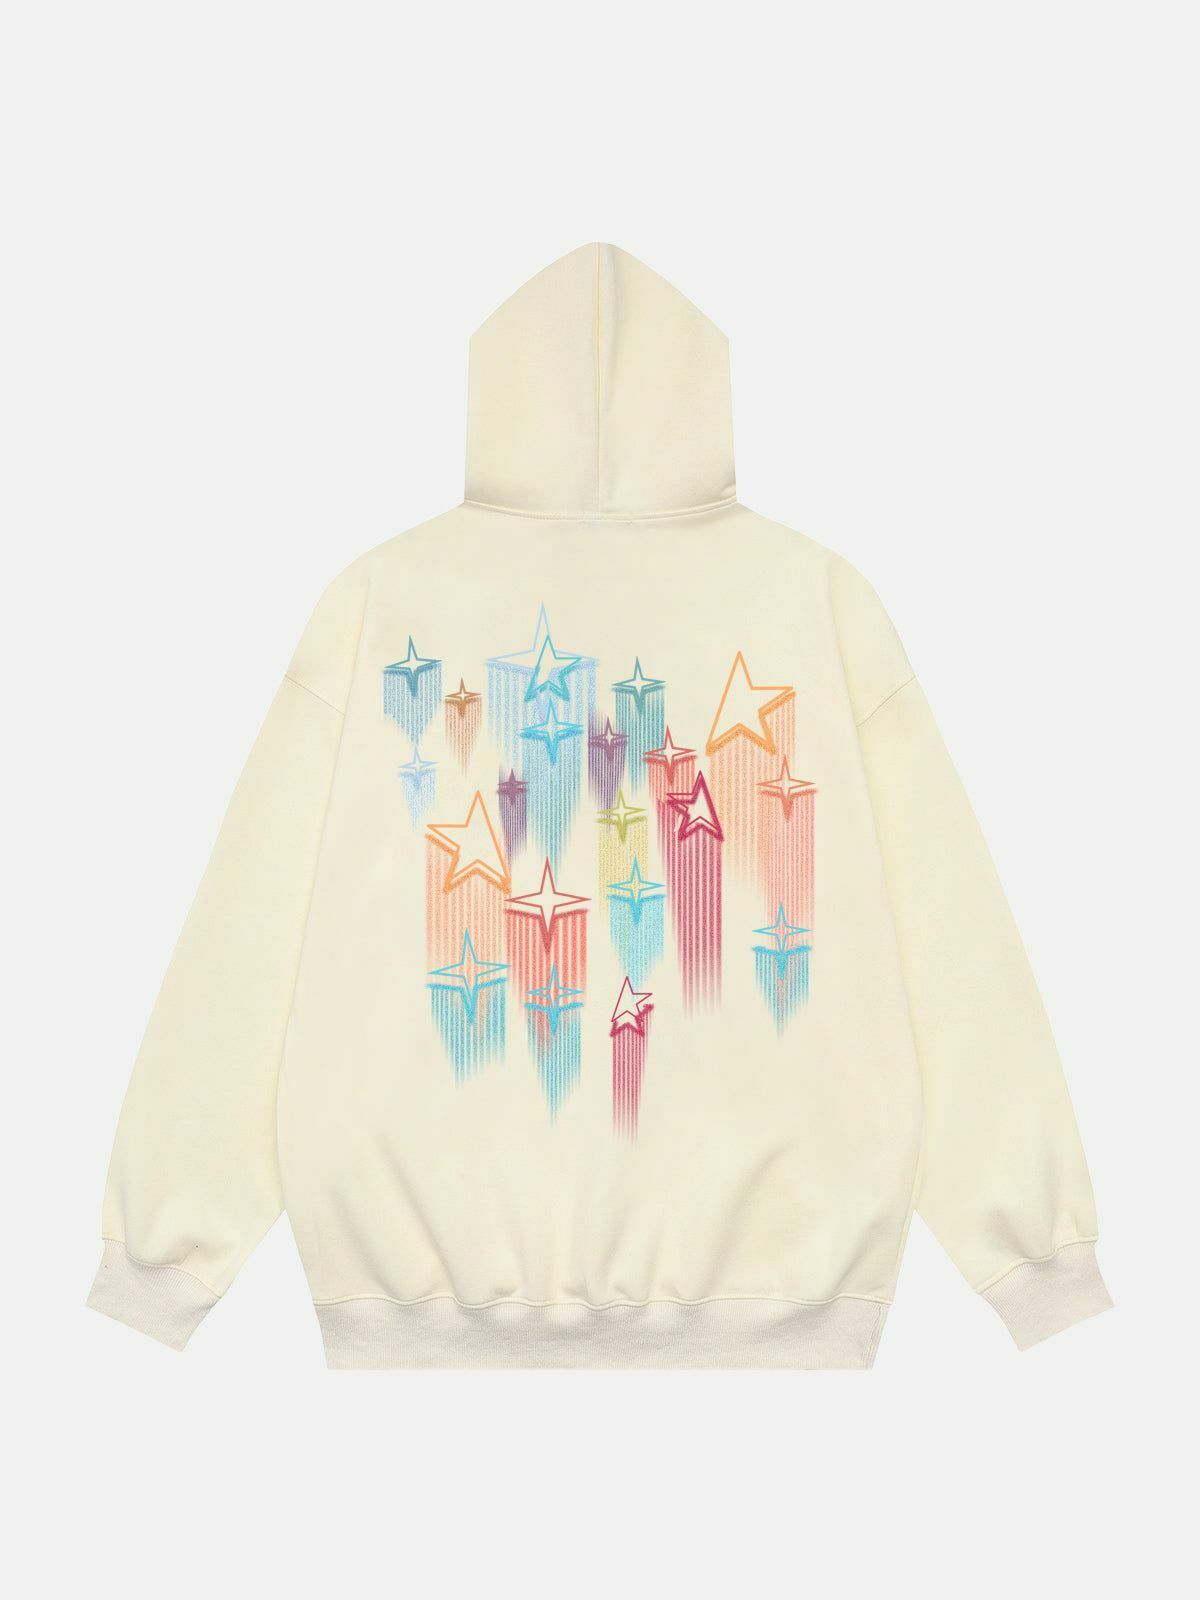 youthful star embroidery hoodie with graffiti edge 8853